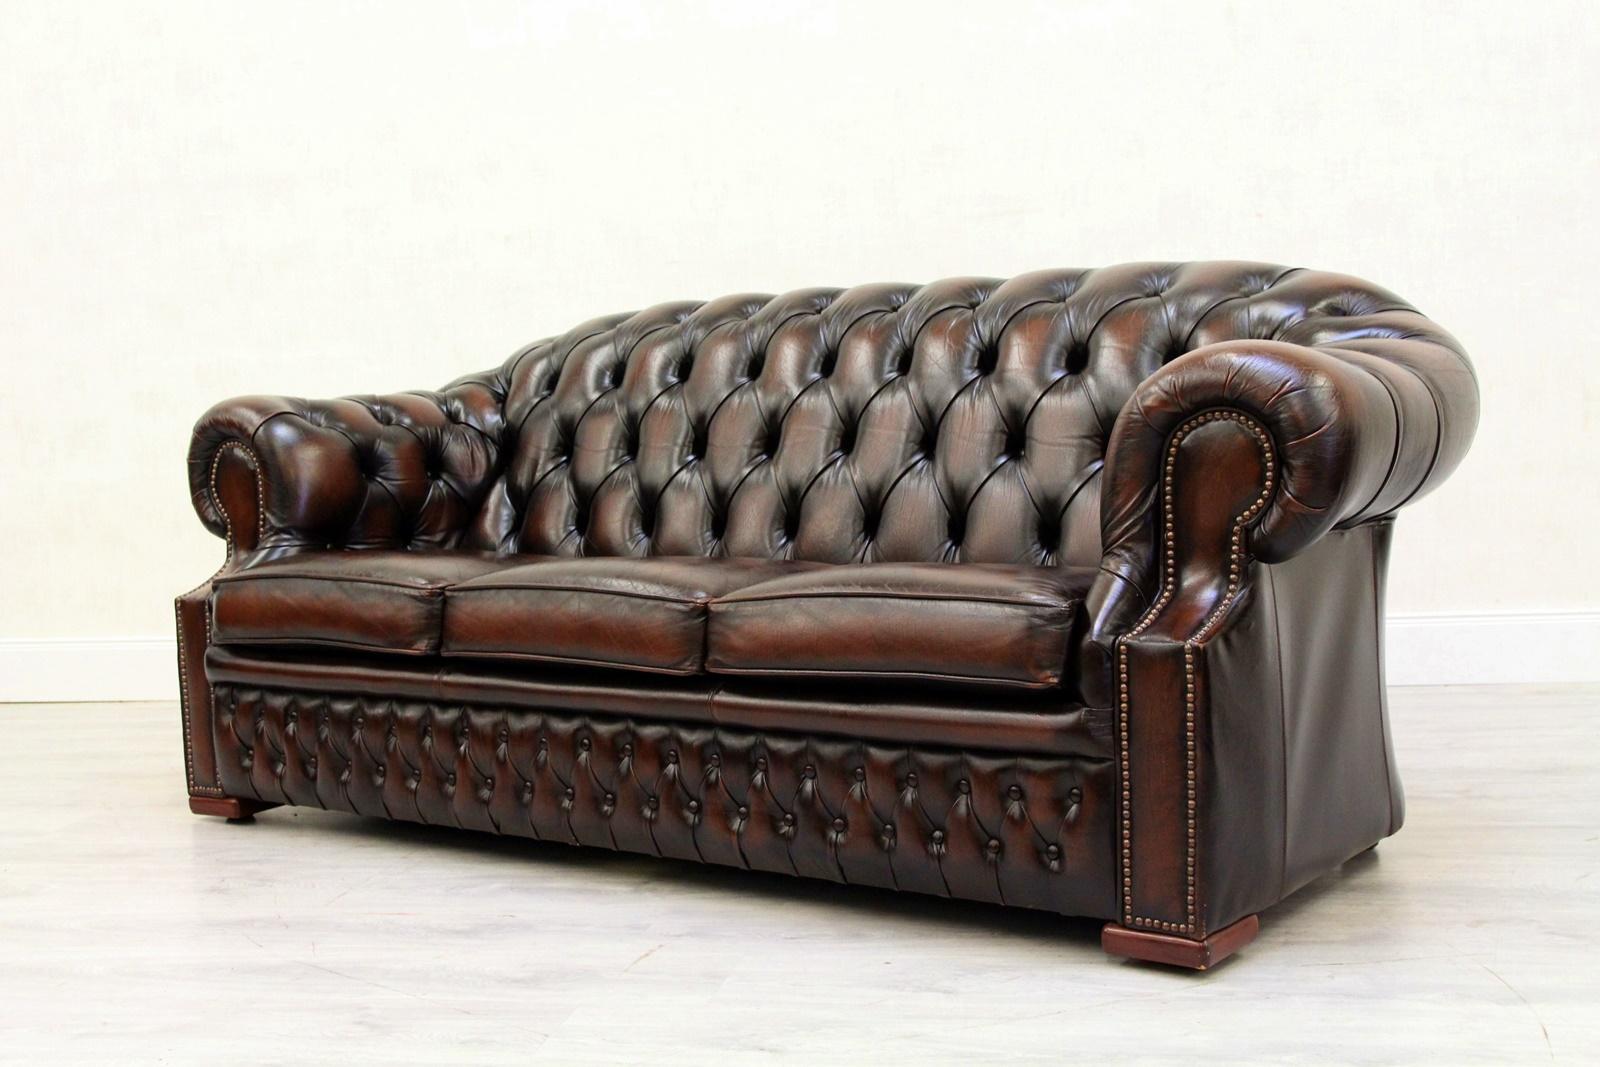 Chesterfield Centurion Sofa Leather Antique Vintage Couch English In Good Condition For Sale In Lage, DE